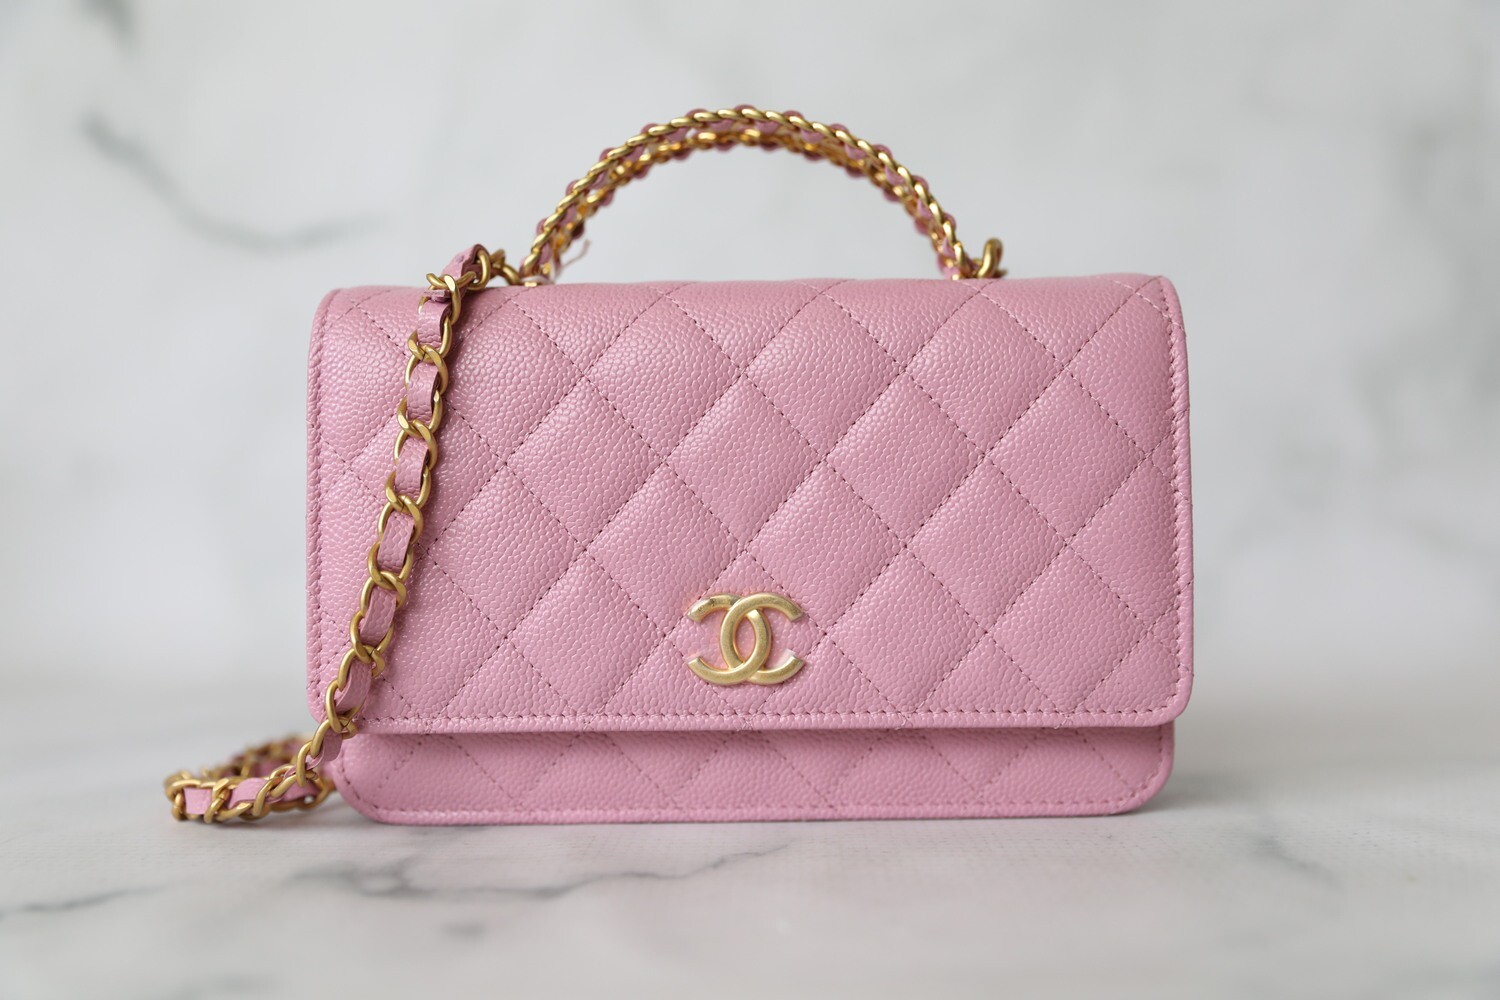 Chanel Wallet on Chain with Top Handle, Pink Caviar with Gold Hardware, New  in Box WA001 - Julia Rose Boston